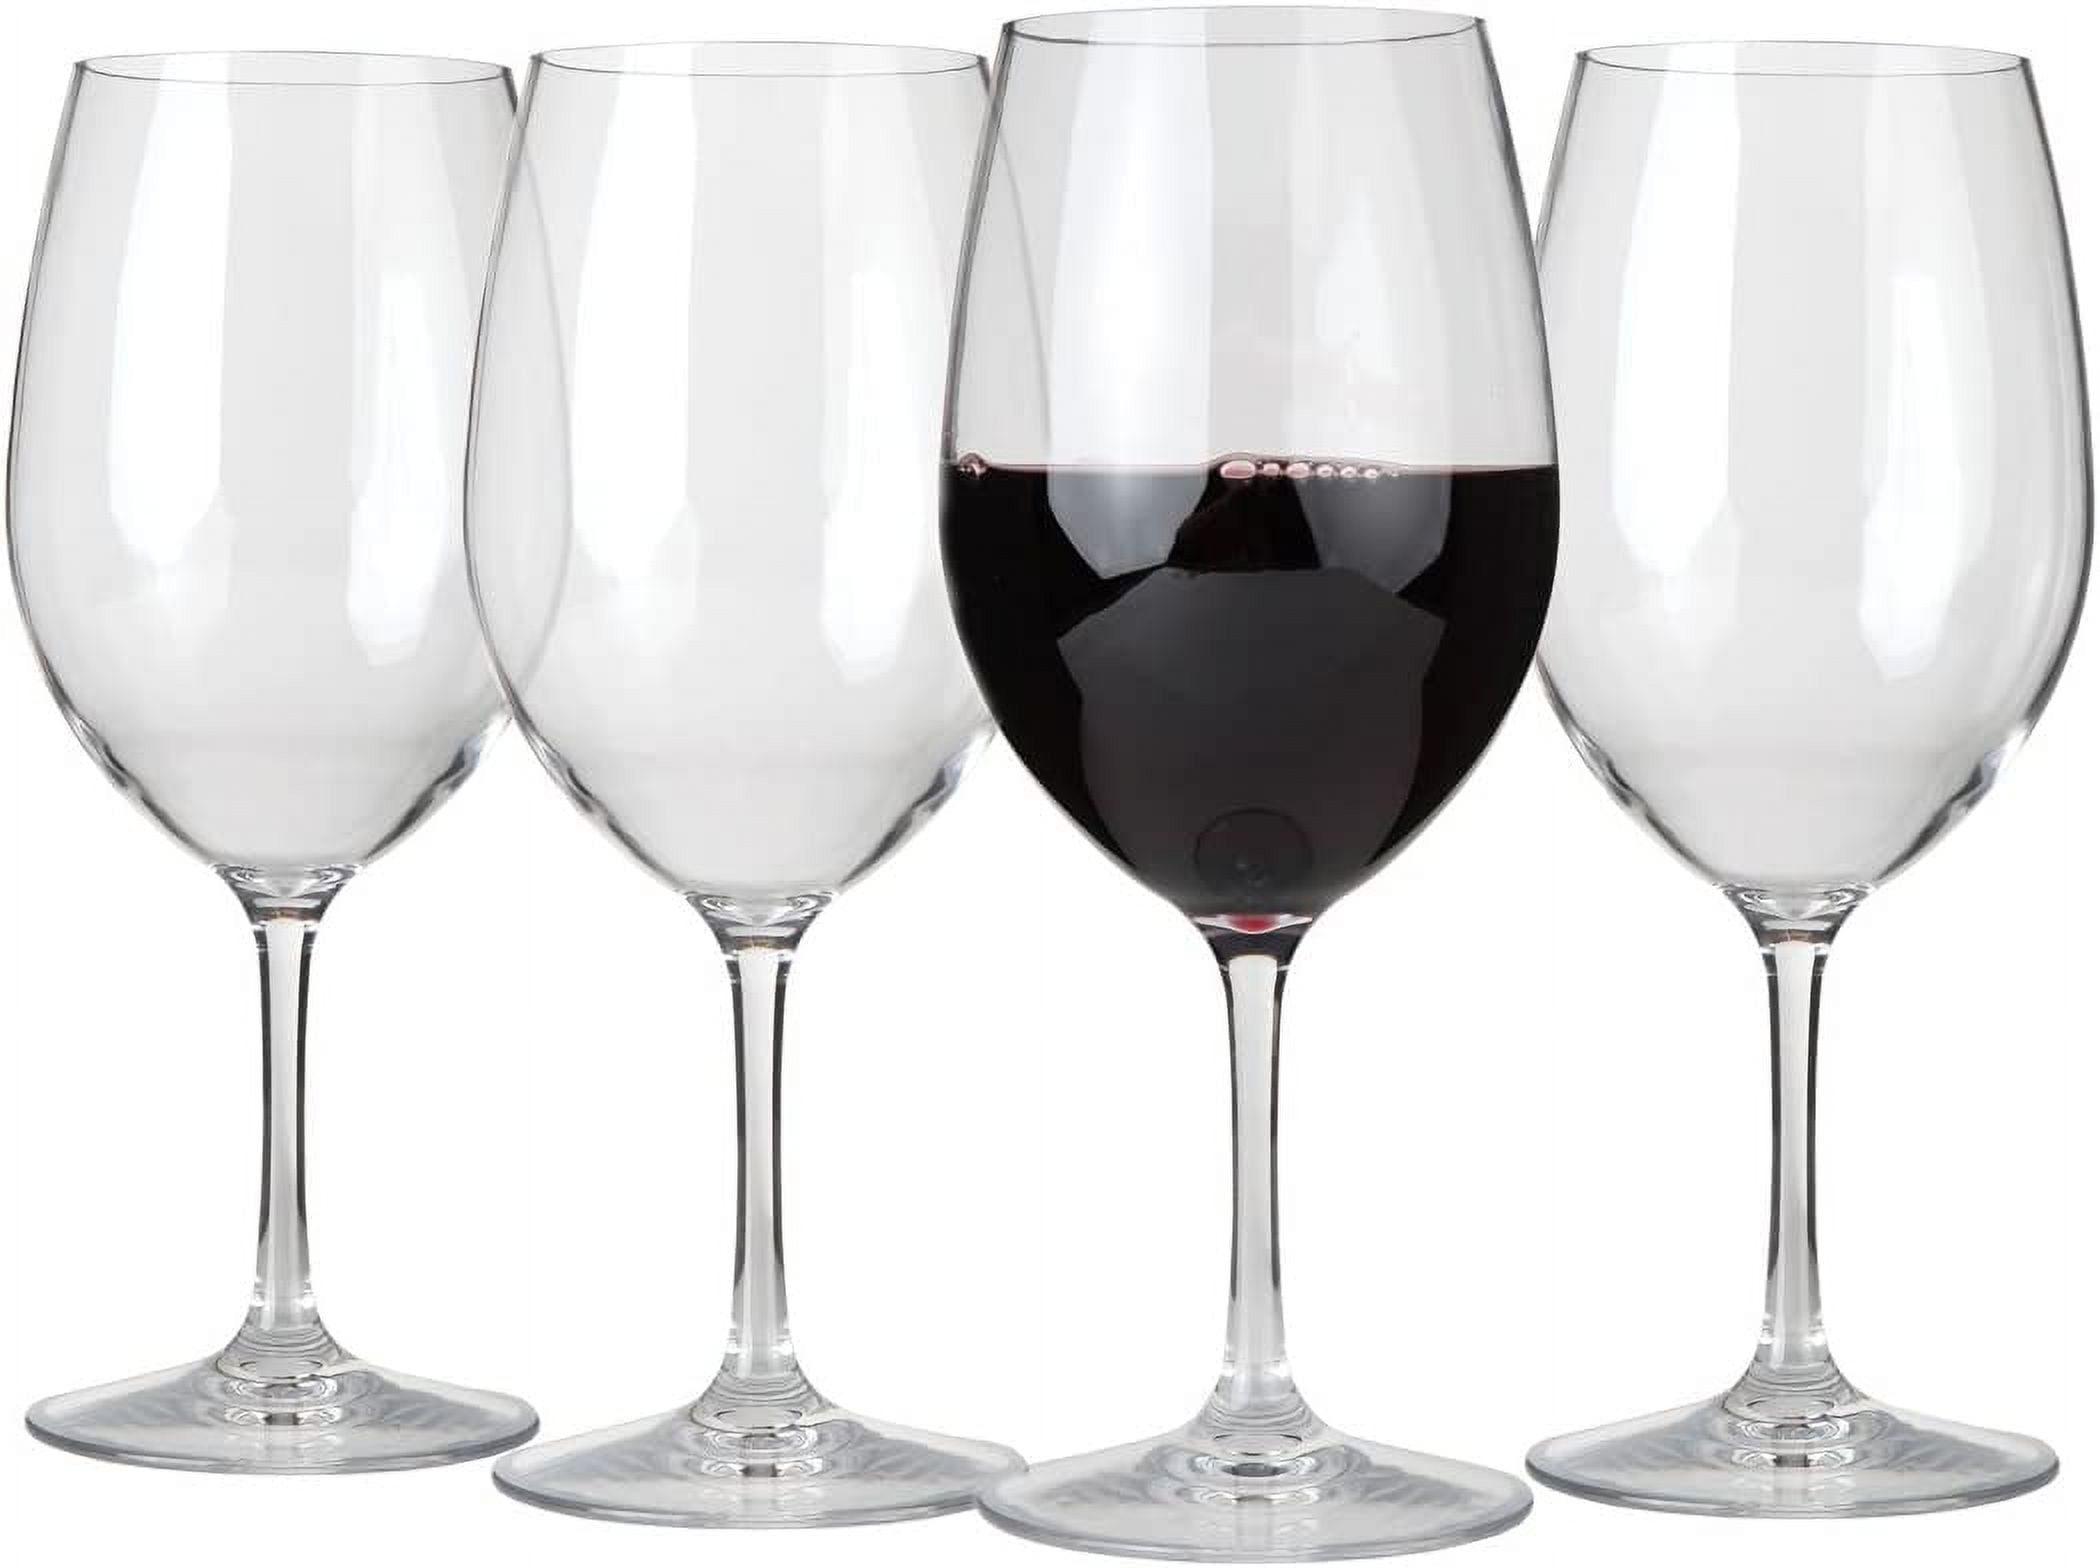 Lidy Colored Wine Glasses Set of 4 - Real Glass Wine Gifts | 13.5 oz Red  Wine Glasses Set of 4 | Col…See more Lidy Colored Wine Glasses Set of 4 